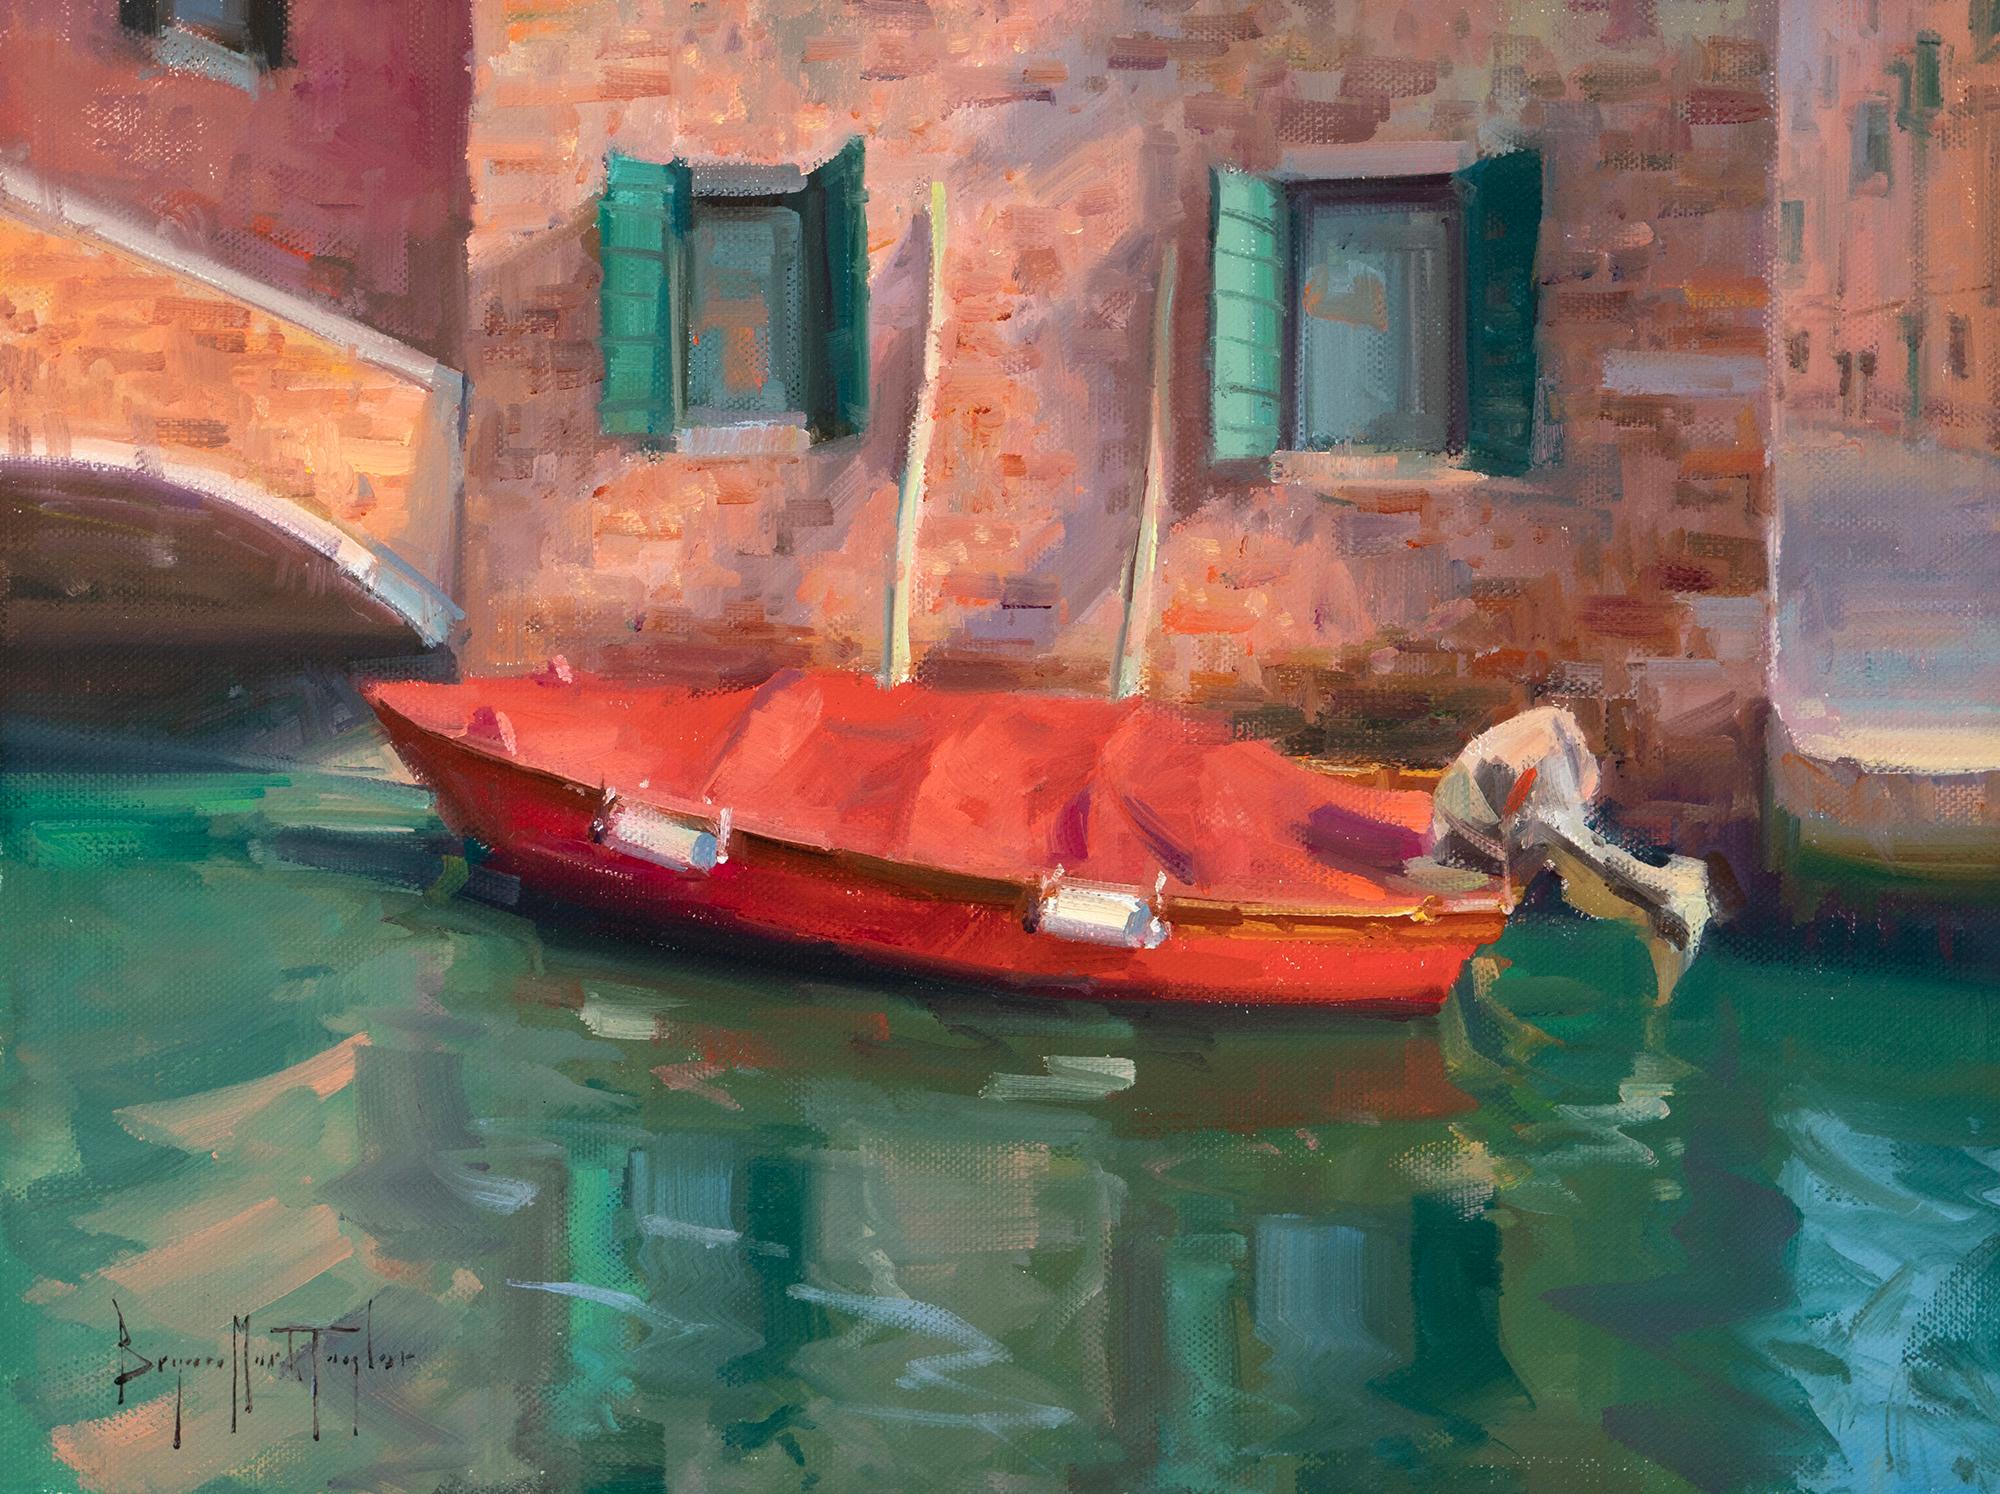 Bryan Mark Taylor Landscape Painting - "Painted Red" Boat On The Canal In Venice